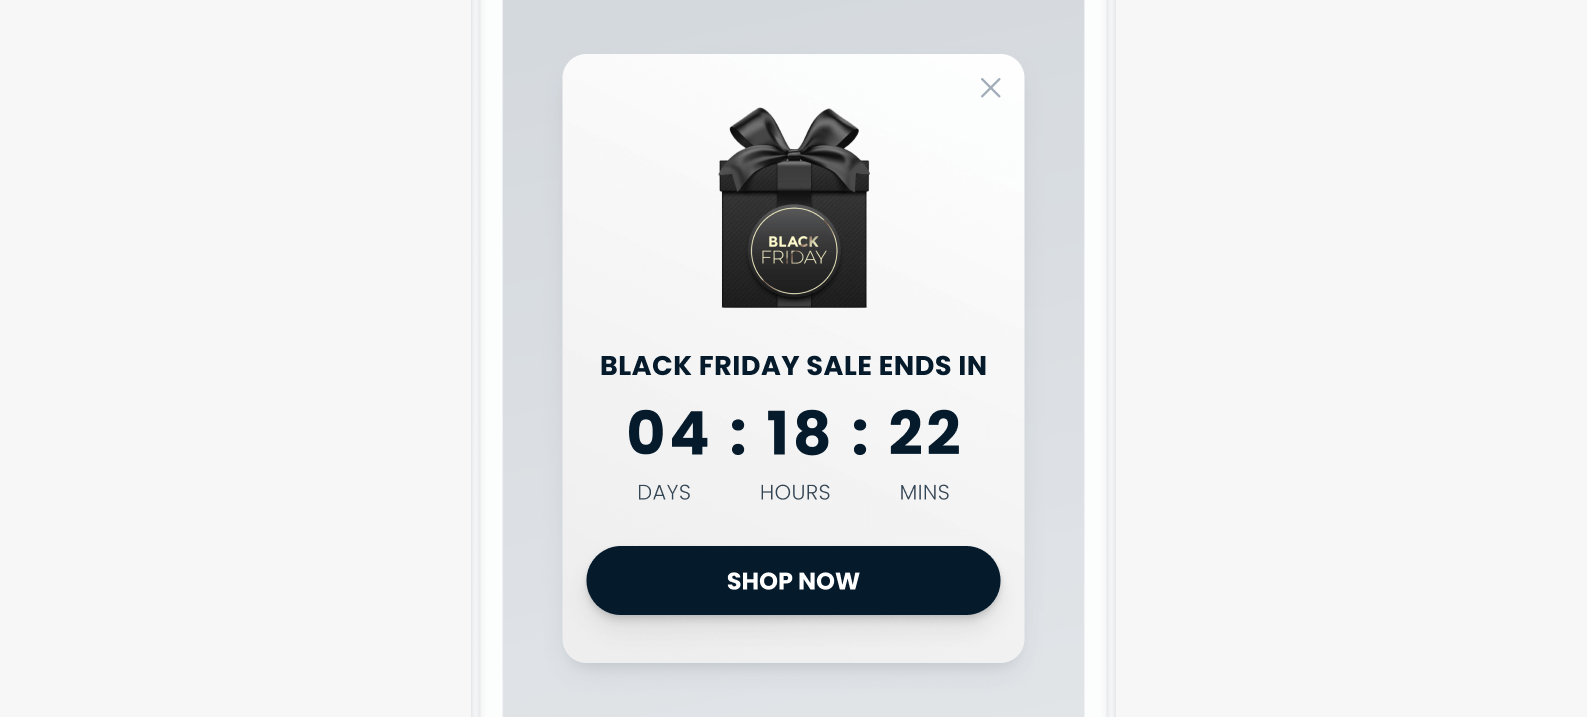 A Guide to Black Friday and Cyber Monday Marketing for Mobile Apps